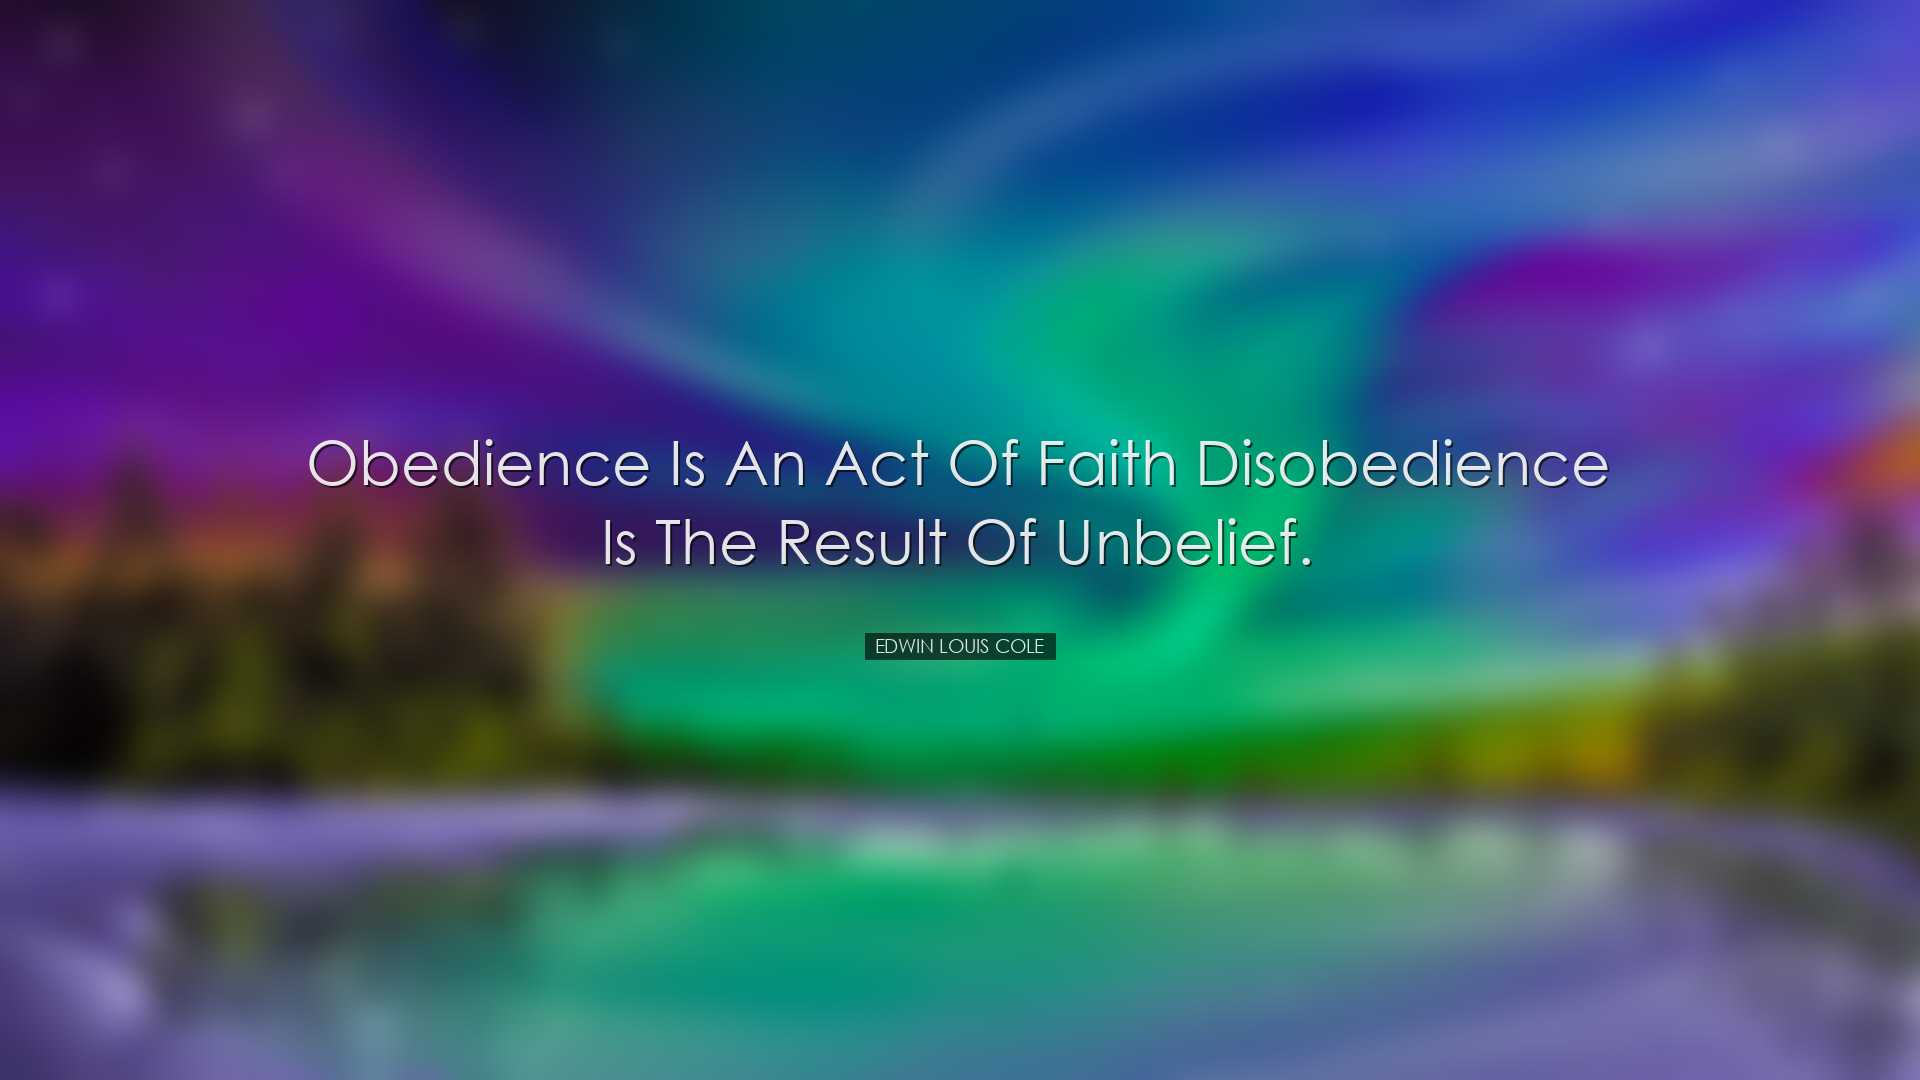 Obedience is an act of faith disobedience is the result of unbelie